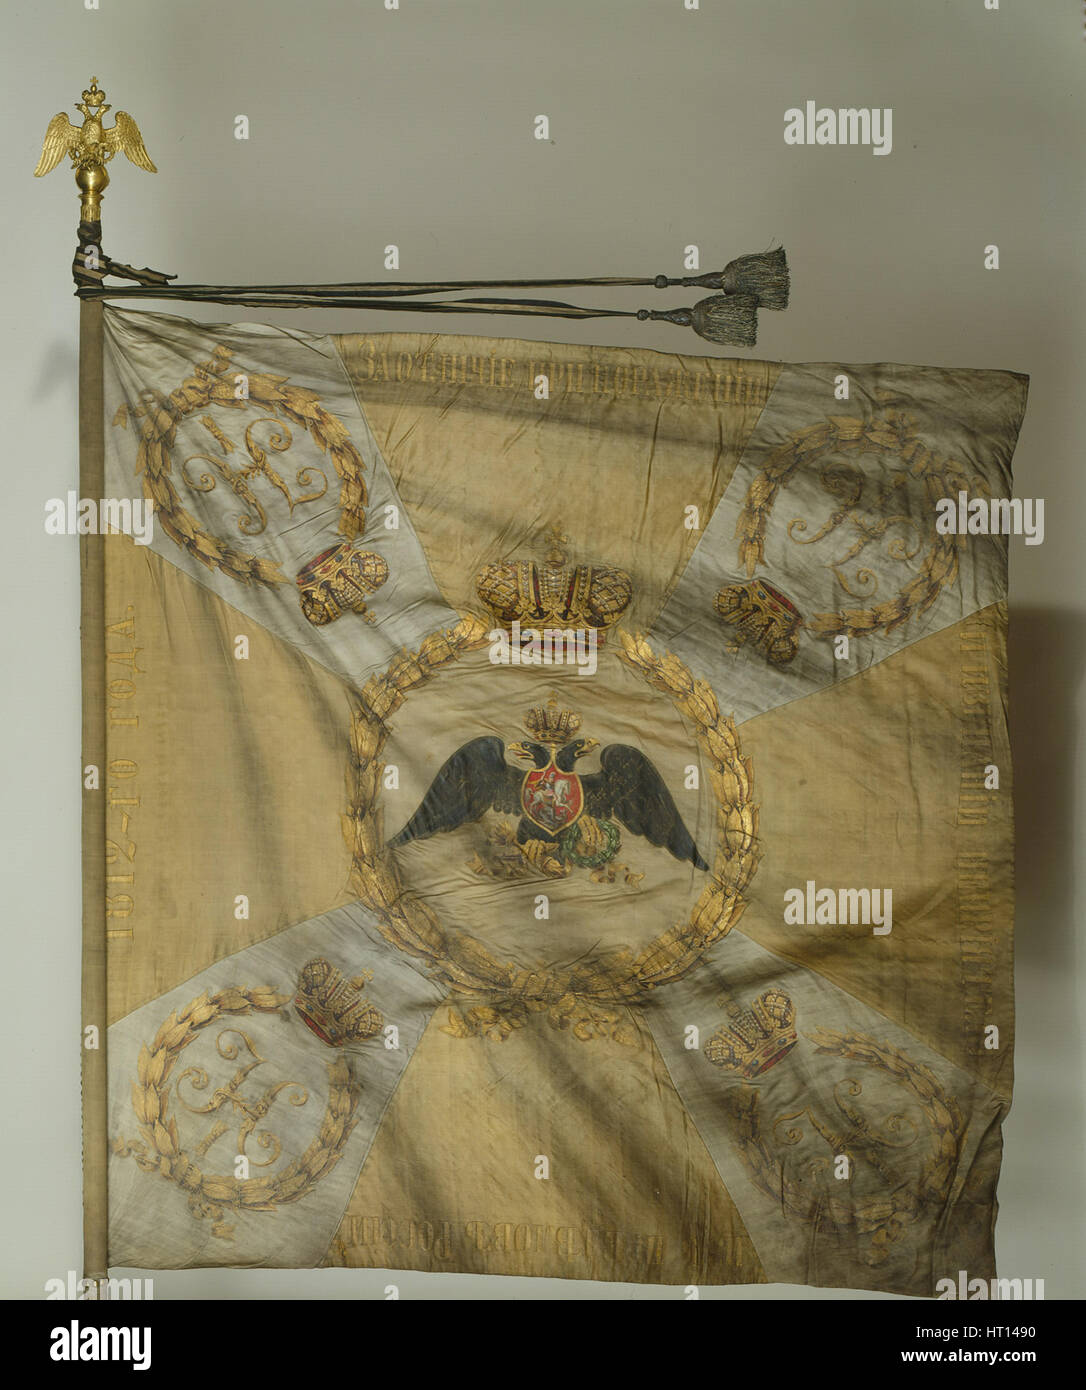 Saint George Flag of the Infantry Regiment at the Time of Nicholas I, 1830-1840s. Artist: Flags, Banners and Standards Stock Photo